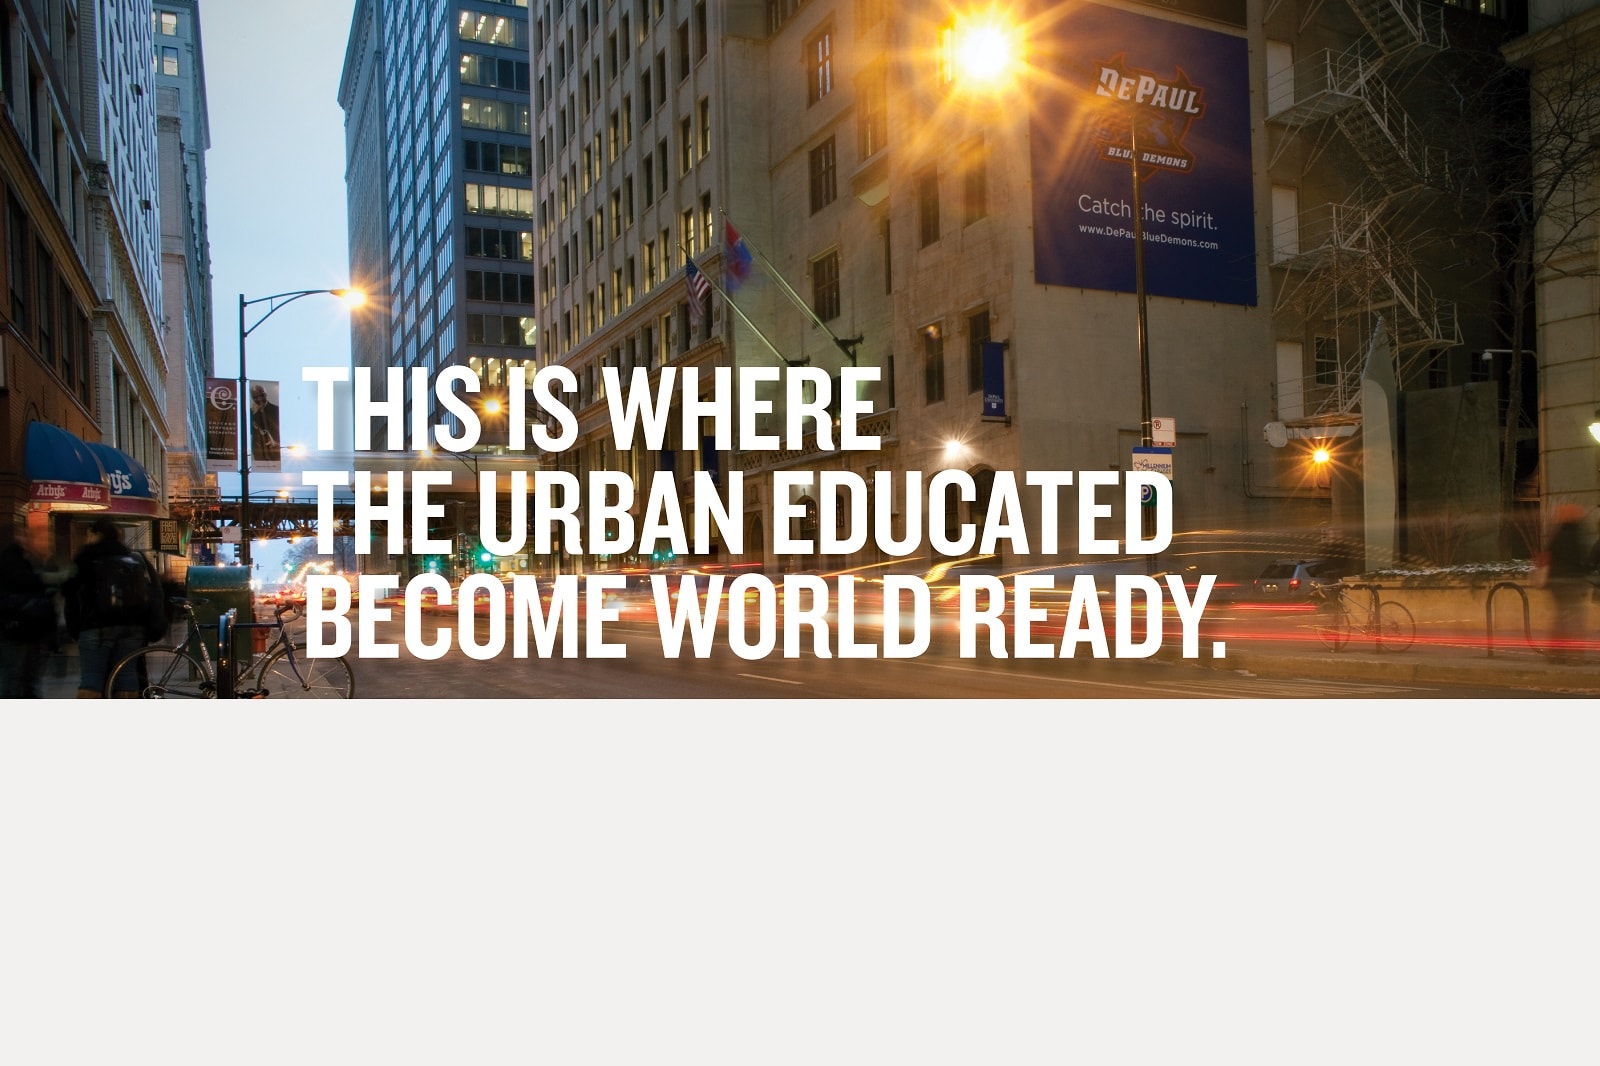 This is where the urban educated become world ready.